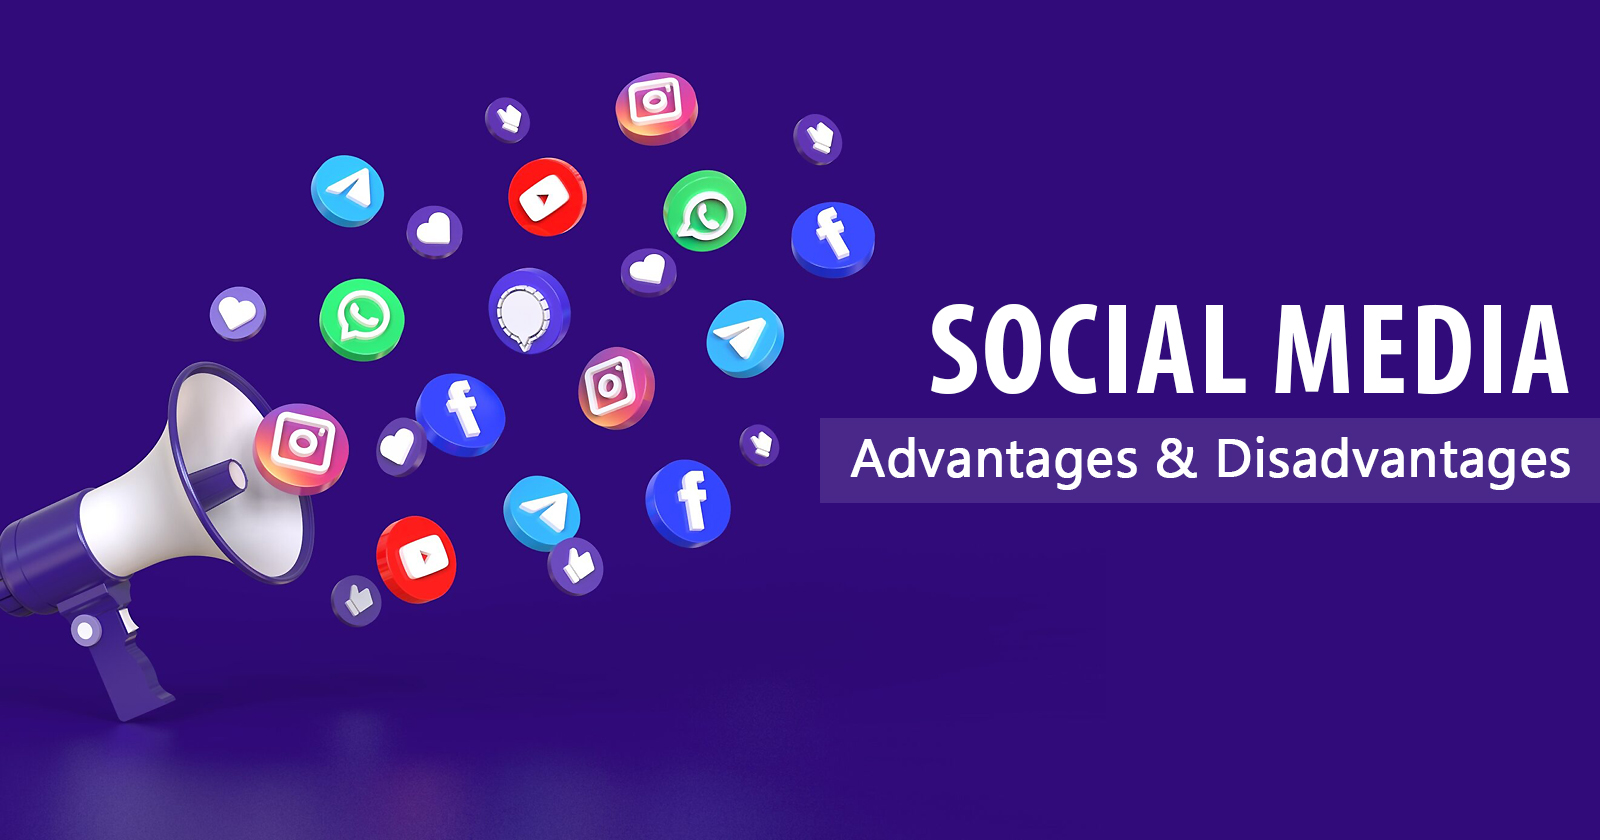 20 Advantages and Disadvantages of Social Media + Real Examples